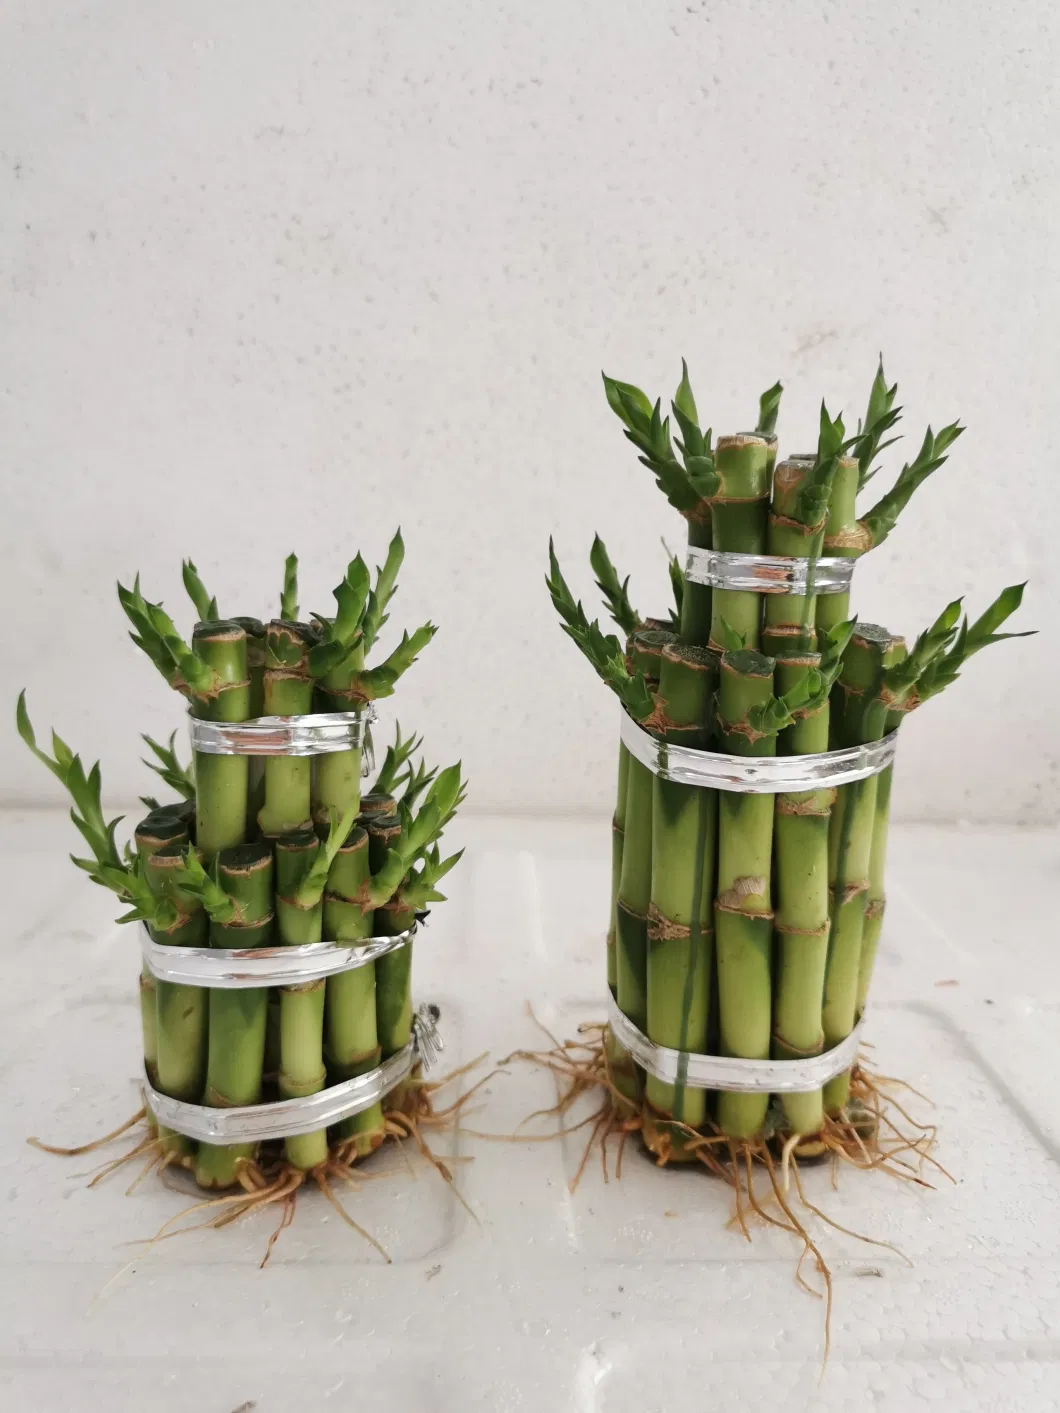 L3 Layers Tower Bamboo Nursery Live Plants Lucky Bamboo Wholesale Succulents